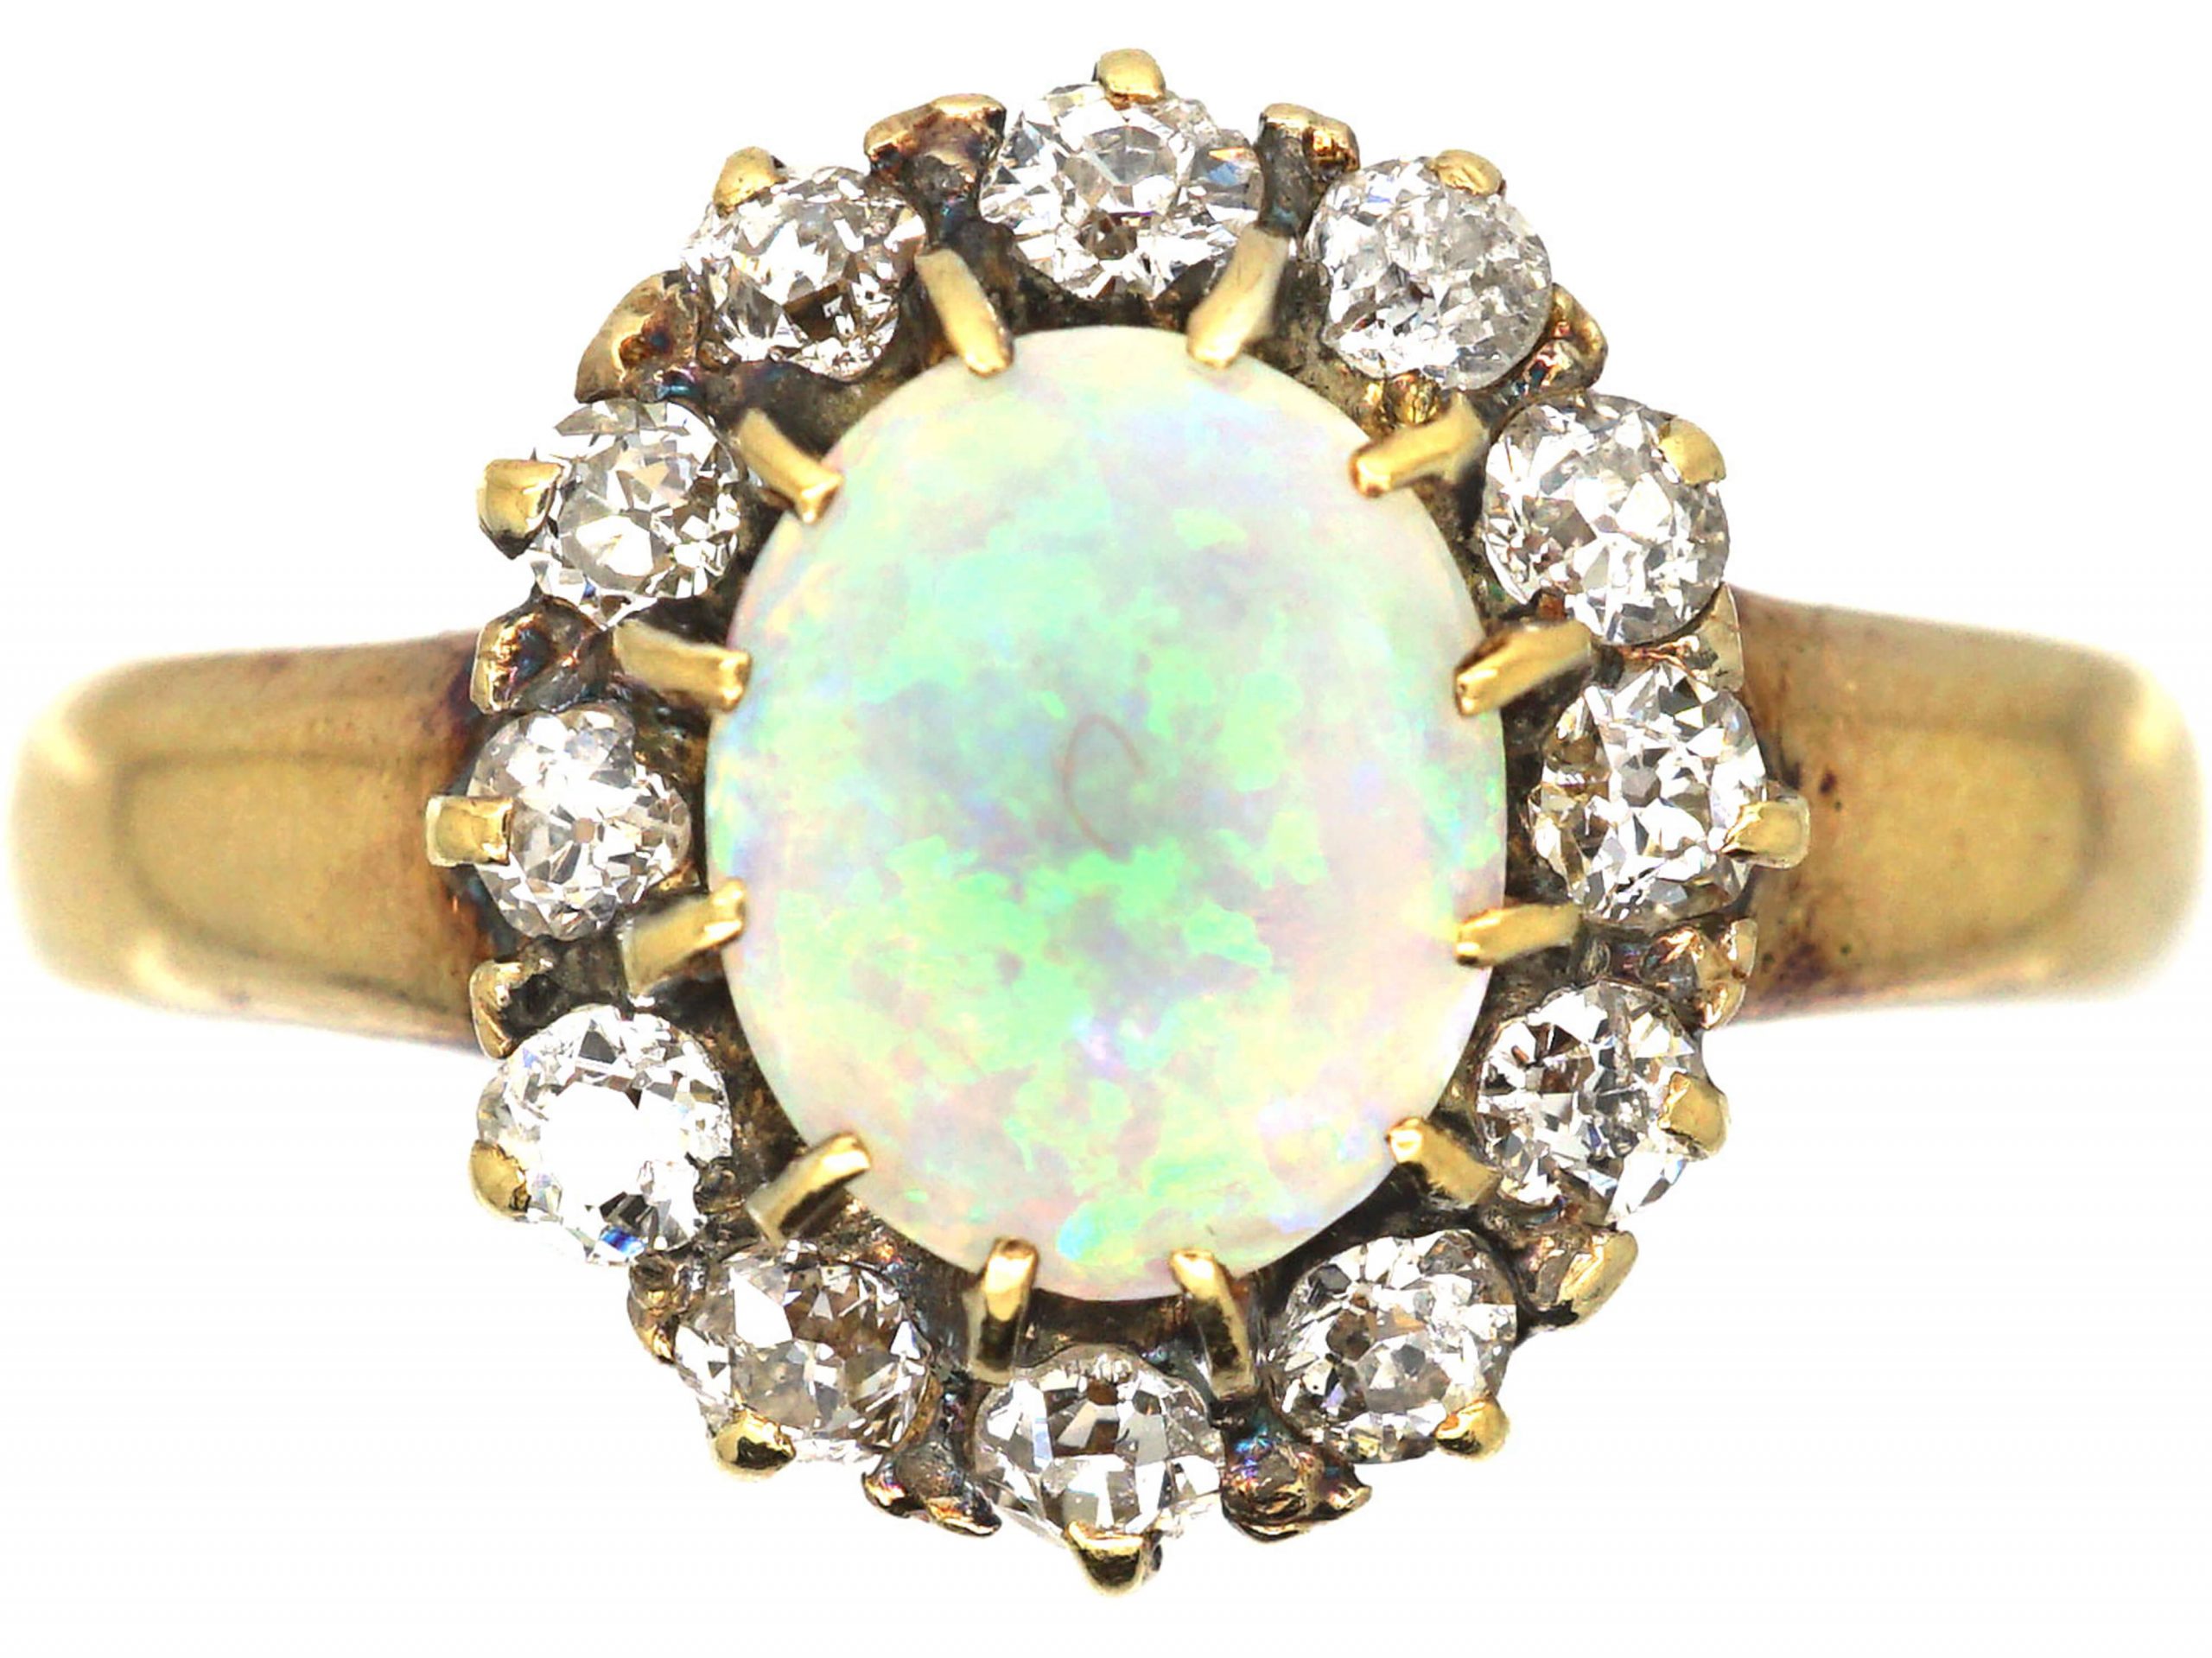 Edwardian 18ct Gold, Opal & Diamond Cluster Ring (171U) | The Antique ...